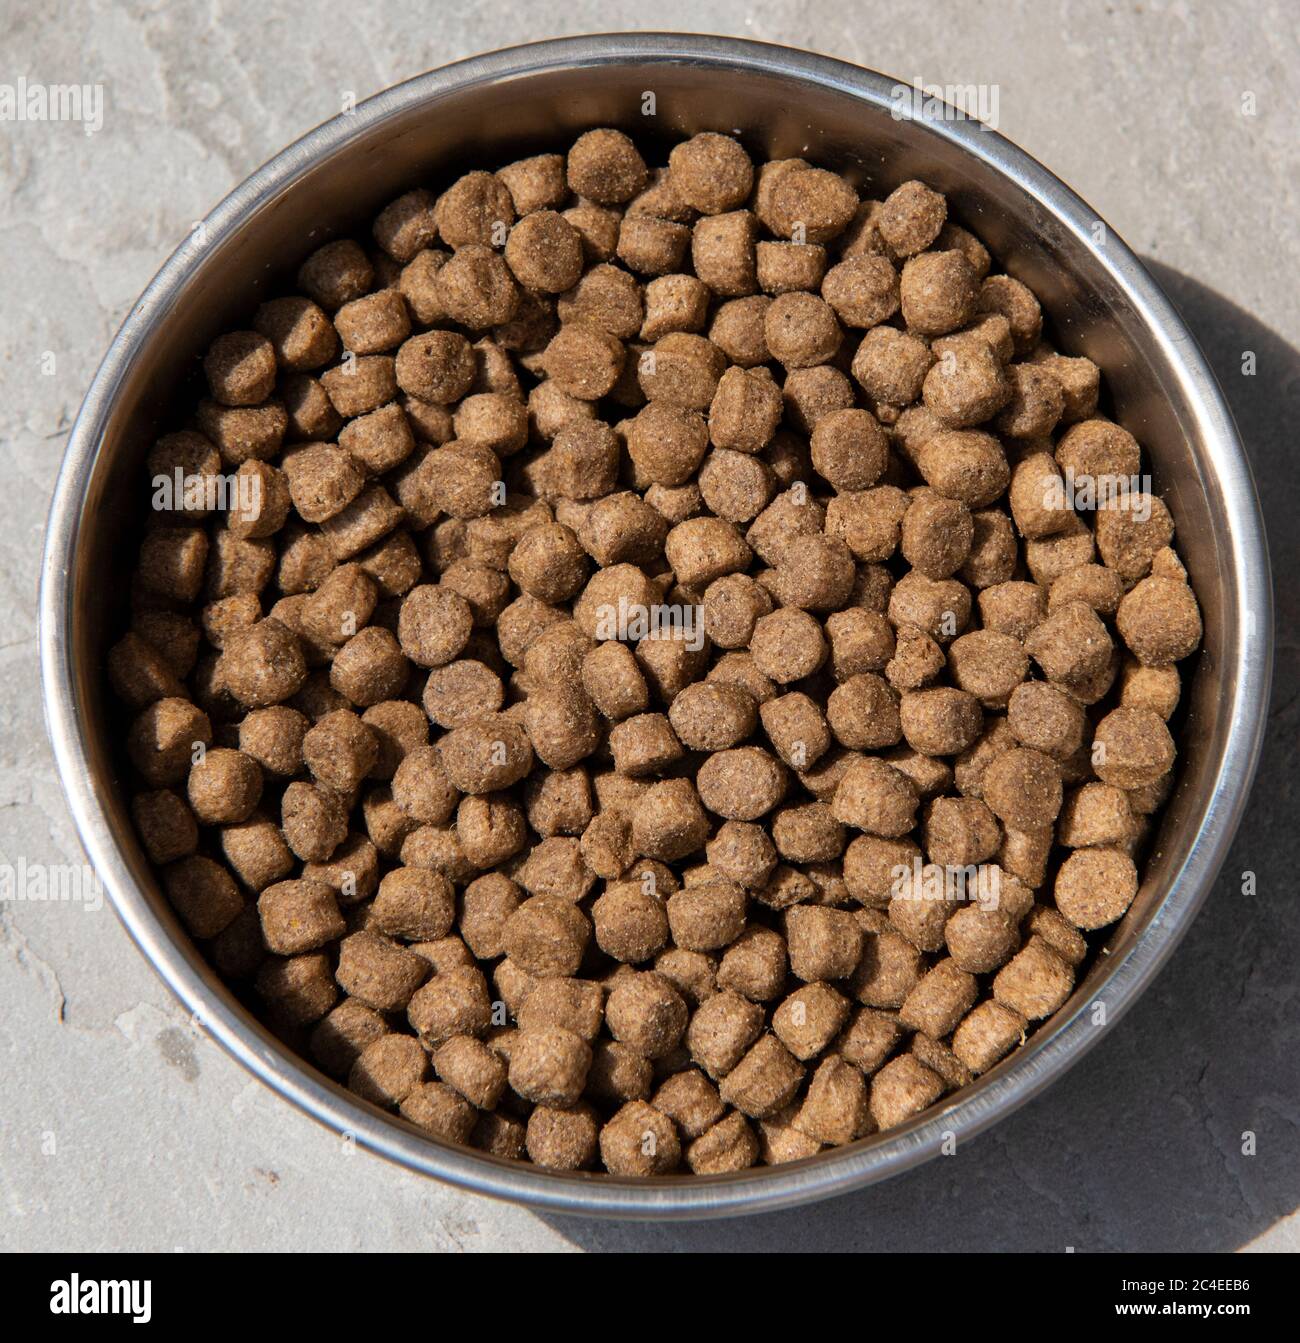 Meaty dry dog food in a dish Stock Photo